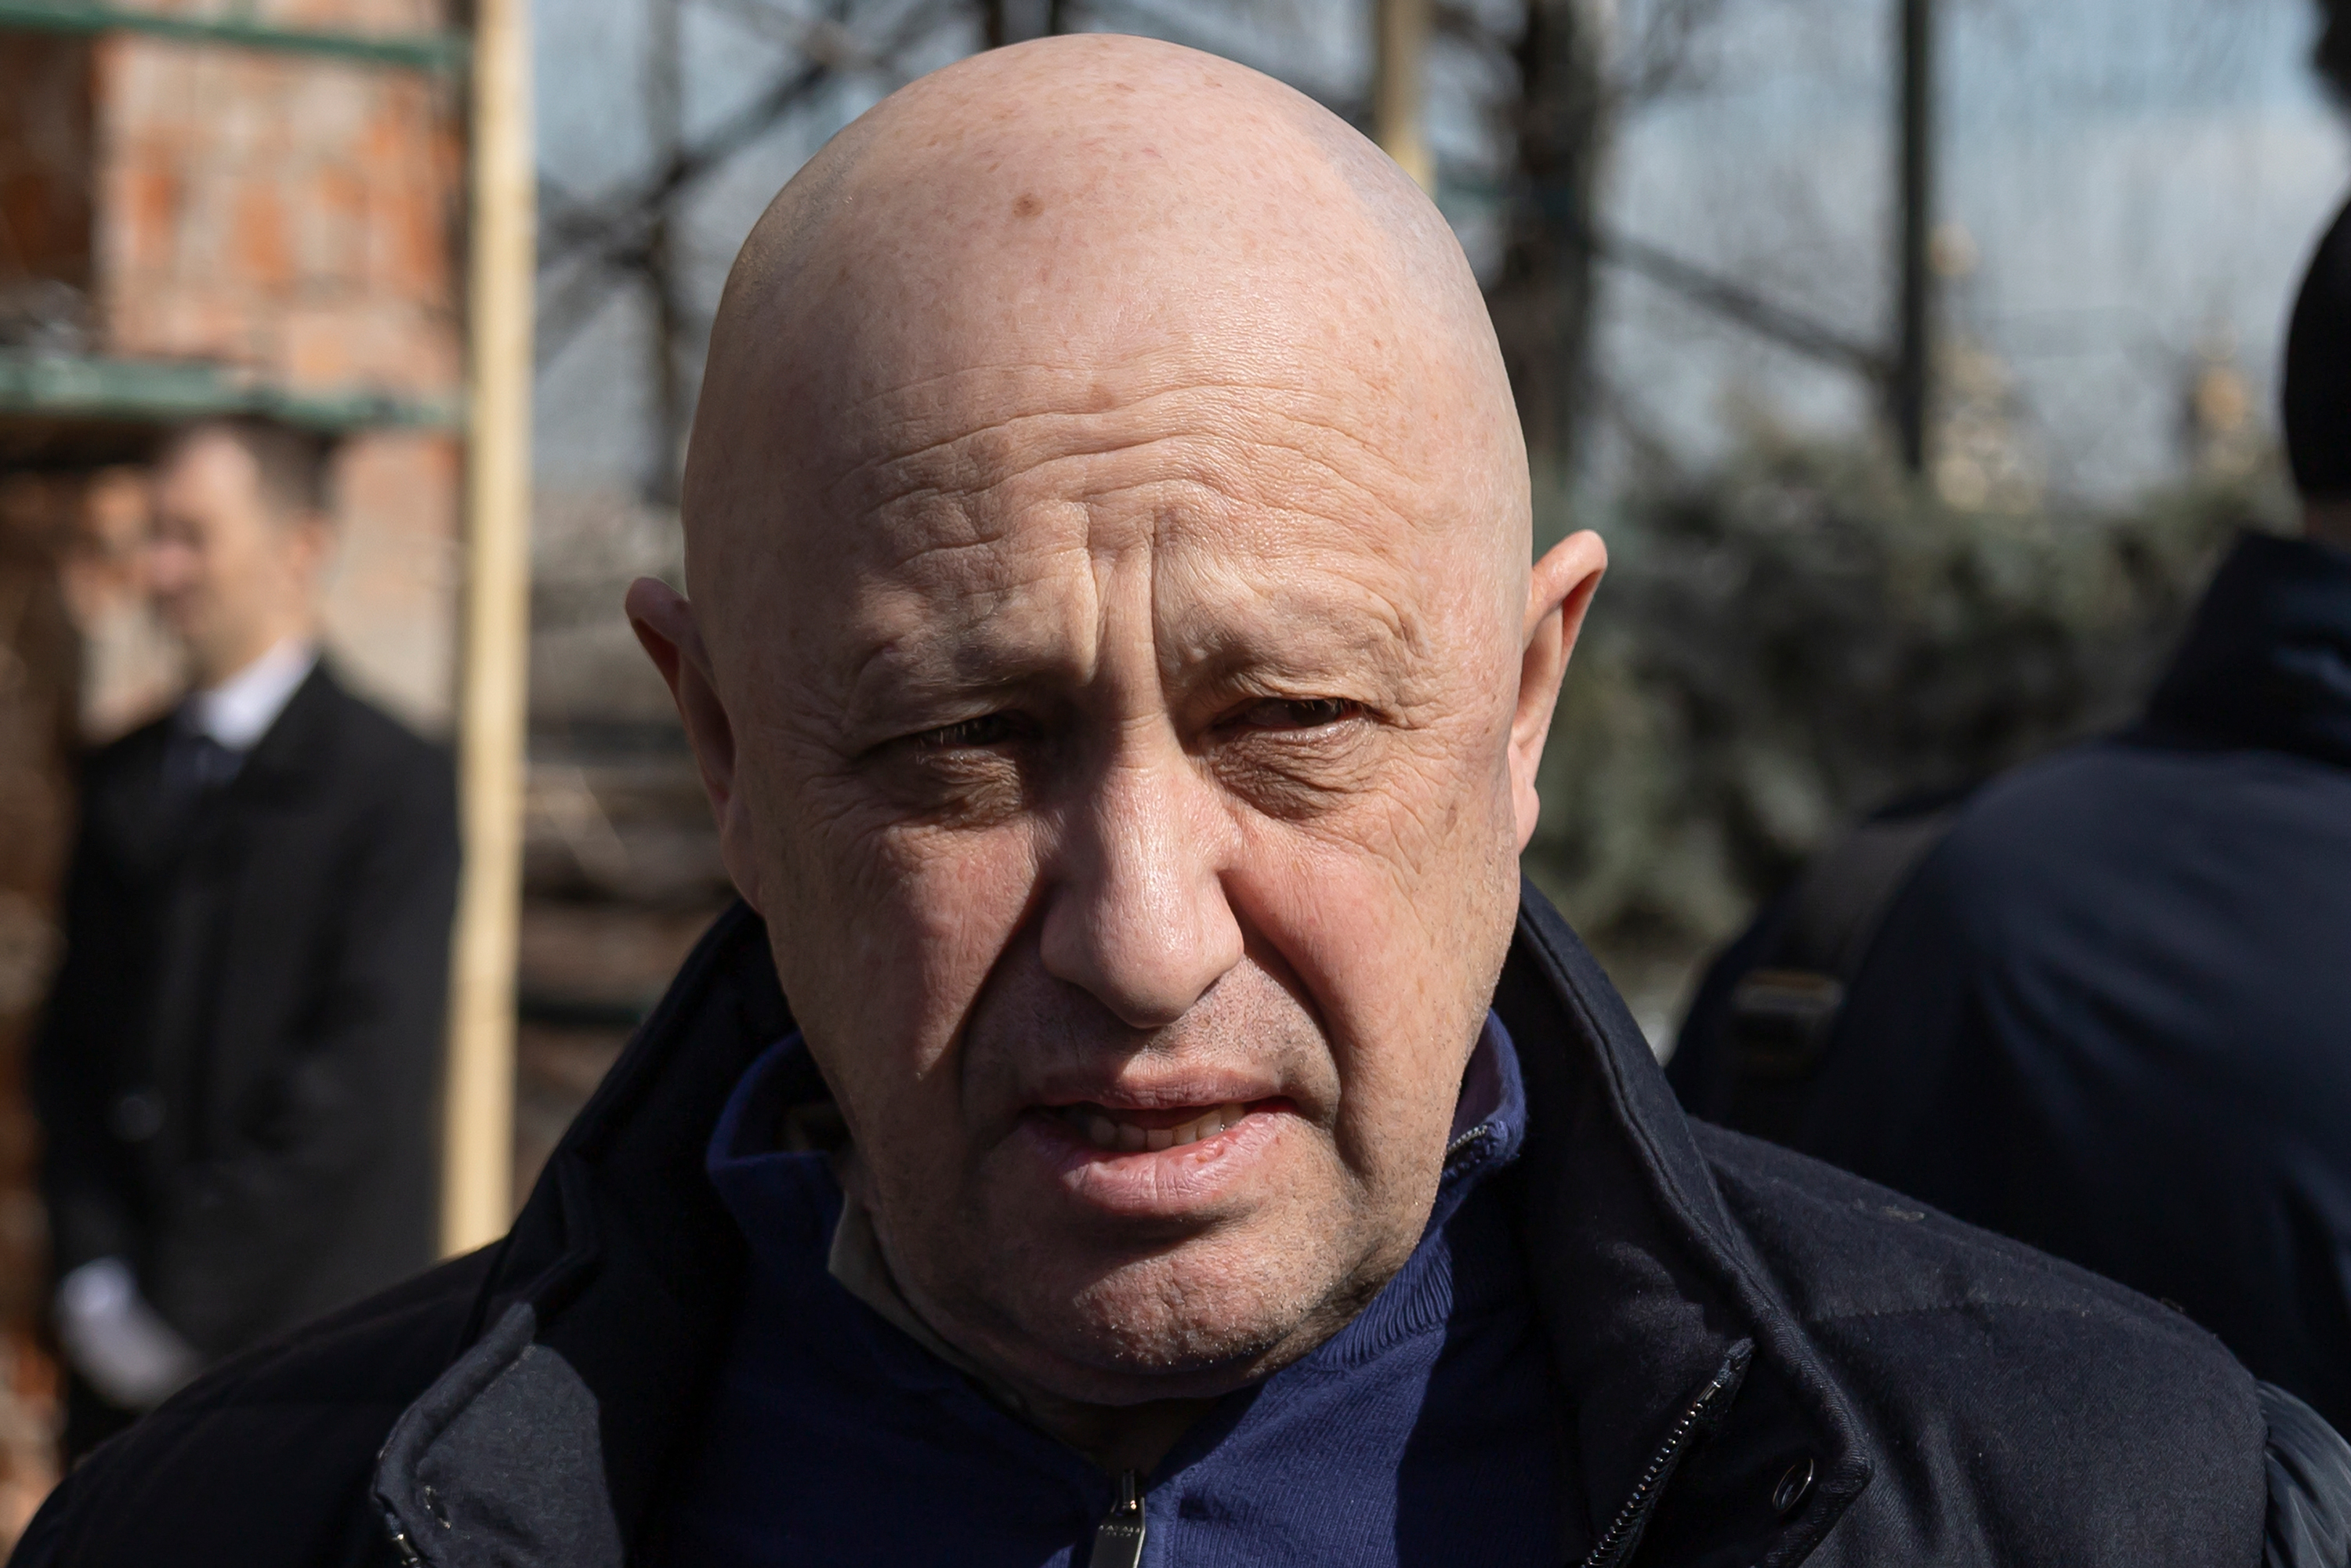 Head of the Wagner mercenary group, Yevgeny Prigozhin, arrives during a funeral ceremony in Moscow, Russia on April 8.